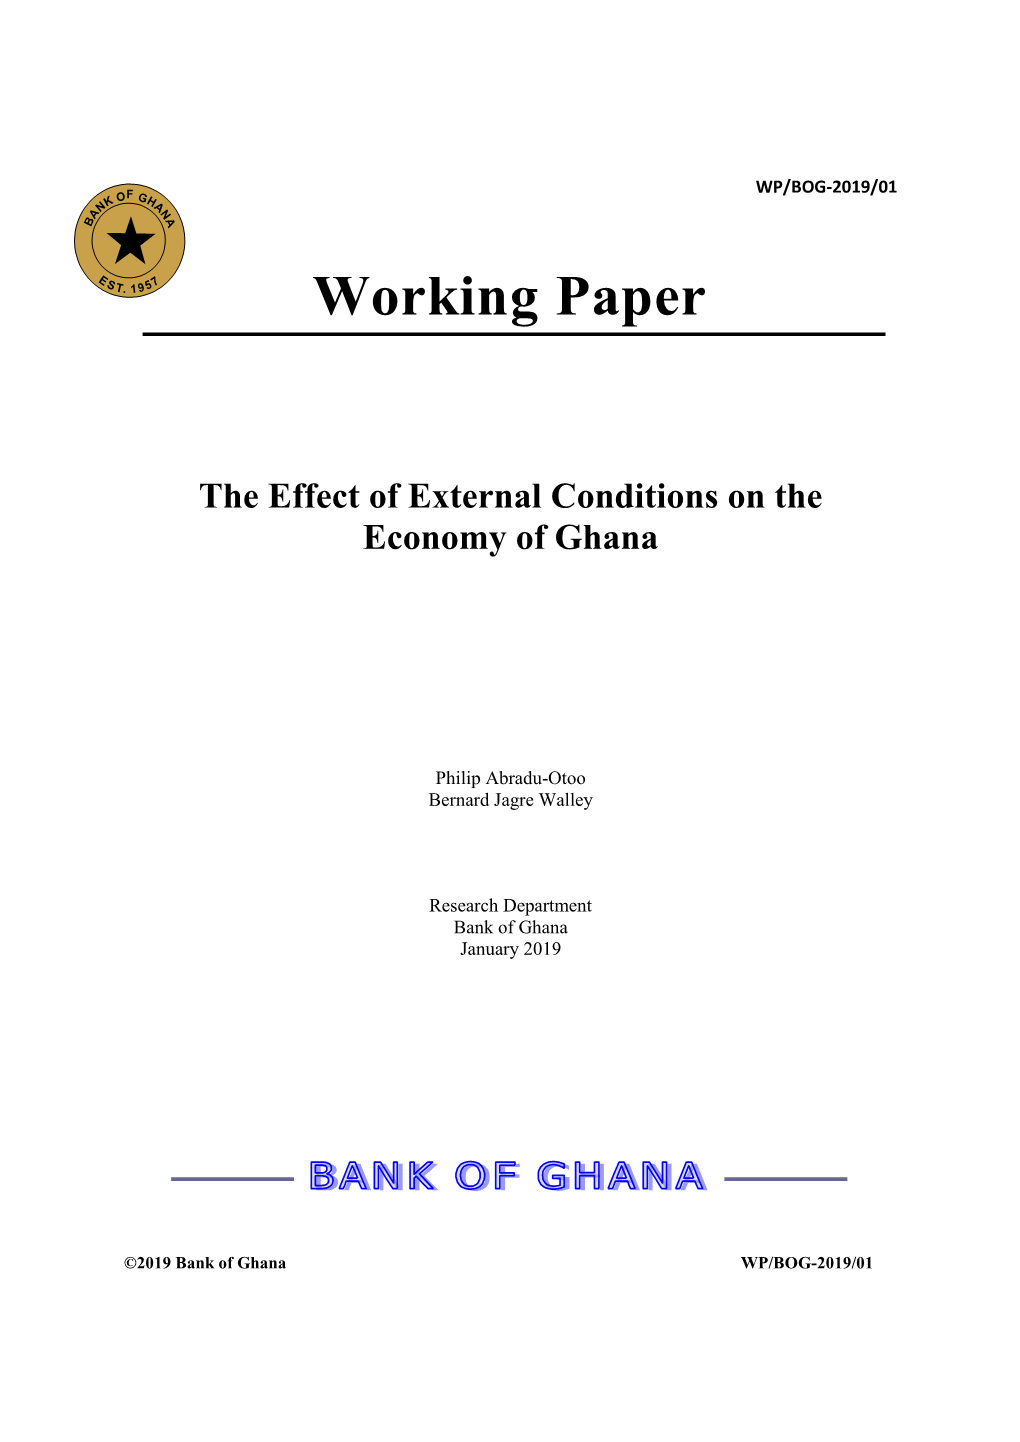 The Effect of External Conditions on the Economy of Ghana